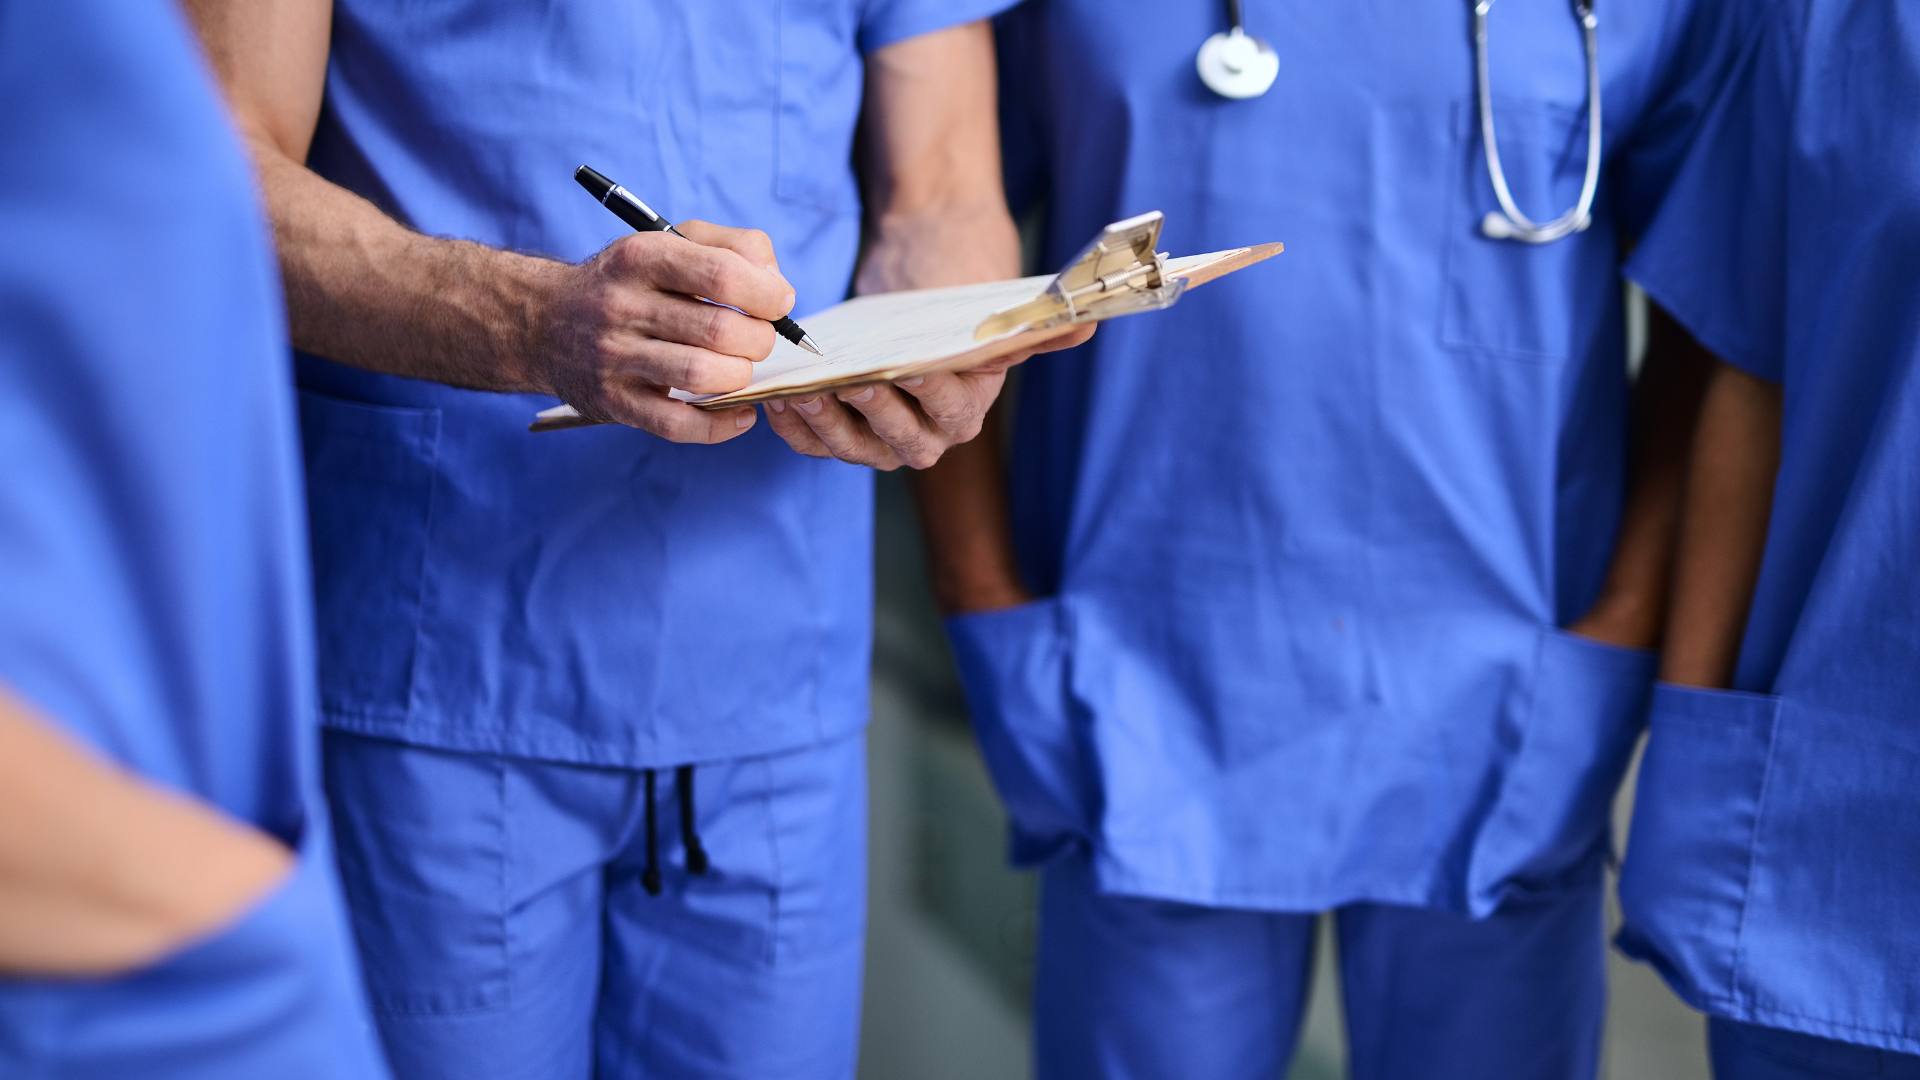 Four nurses wearing blue scrubs stand together. One writes on a clipboard. This is demonstrating the transition from travel nursing.